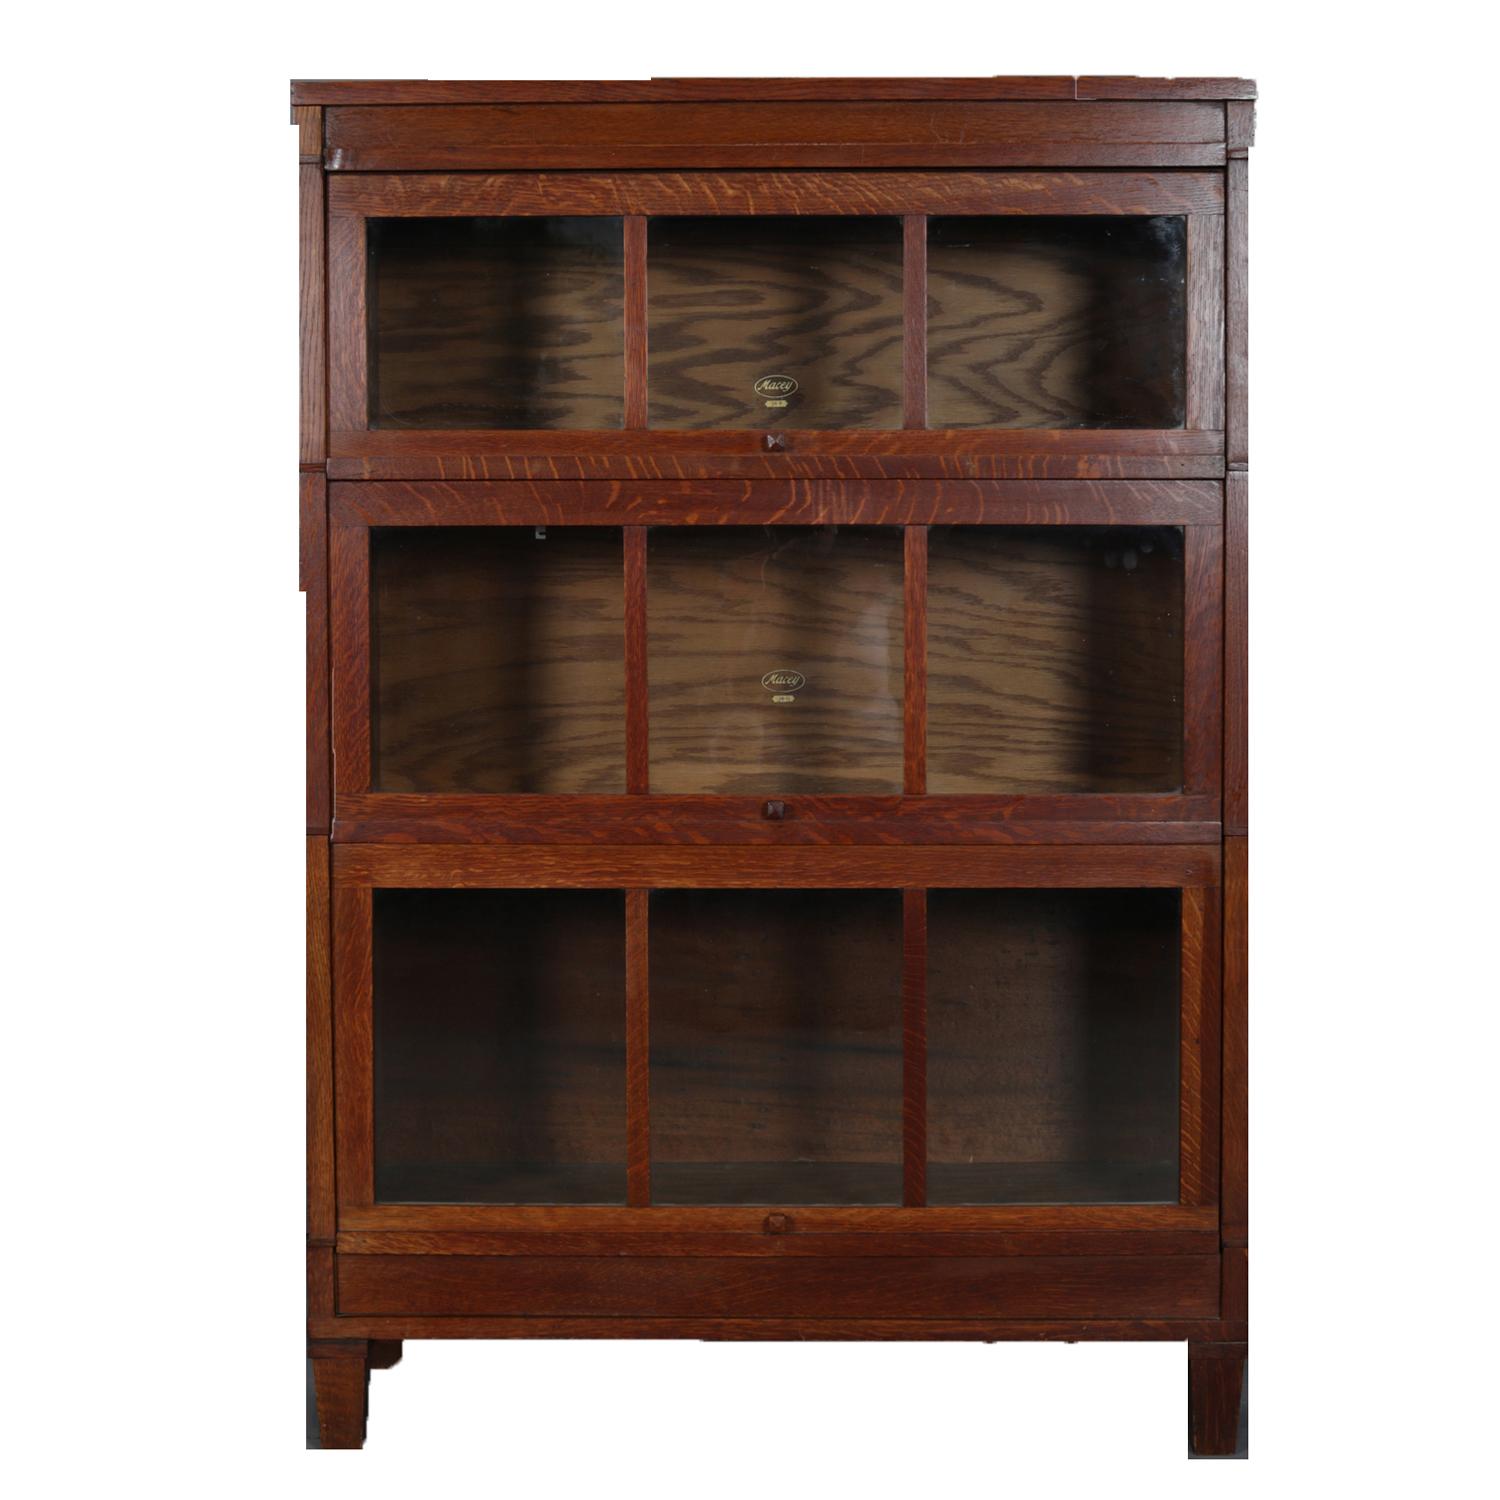 Arts & Crafts mission oak Barrister bookcase by Macey features three stacks each with traditionally recessing 